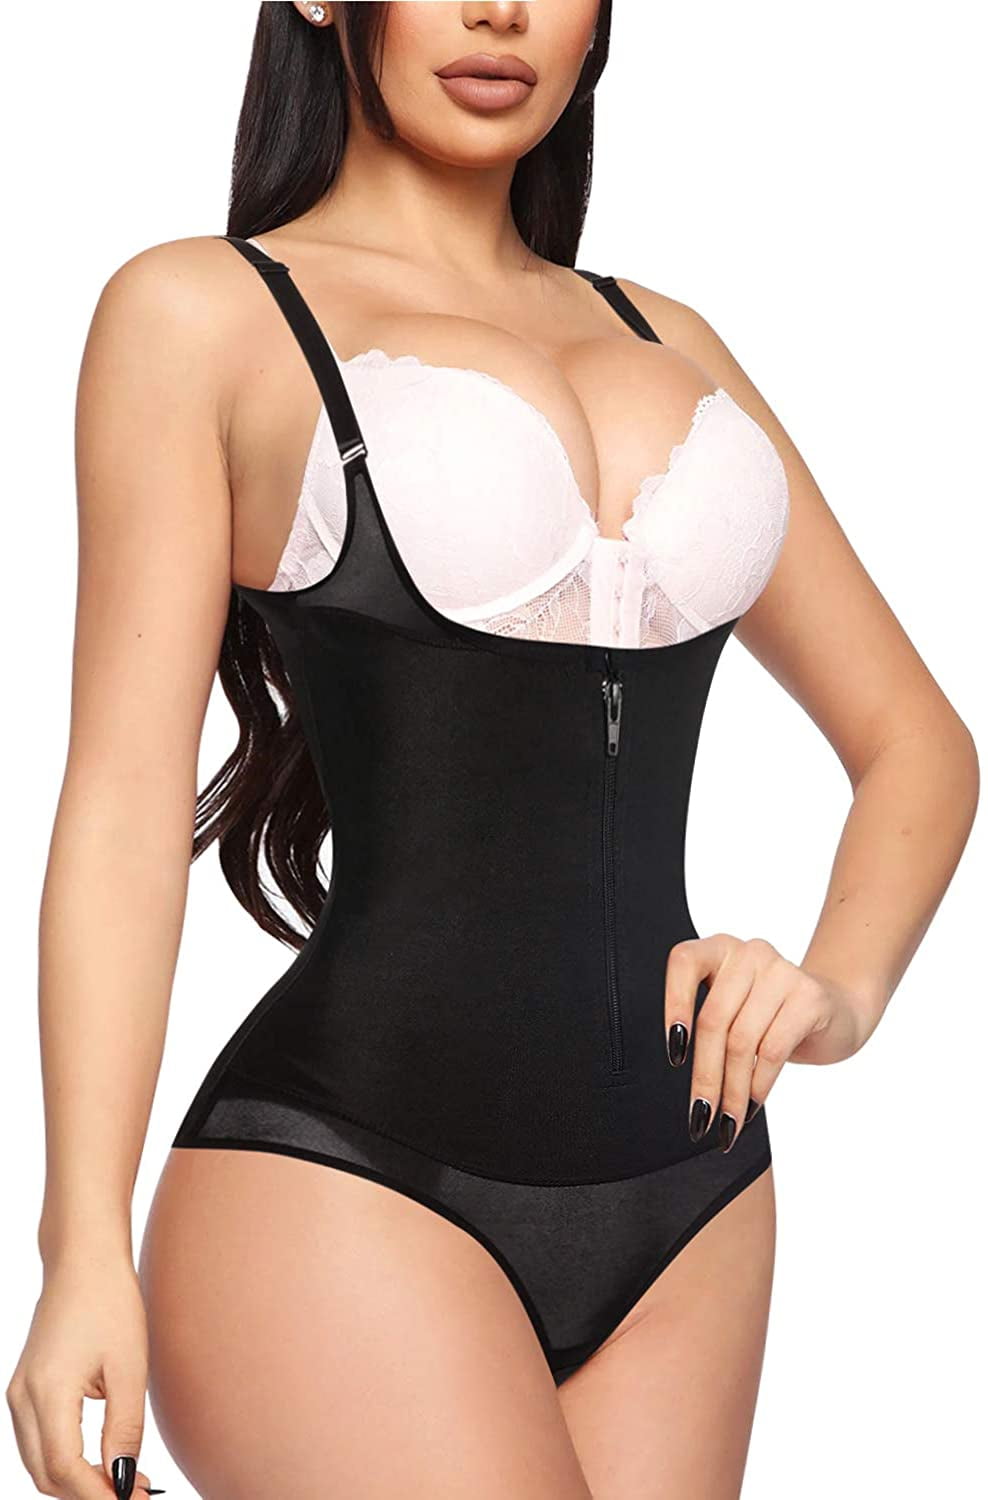 Women Colombianas Post-Surgery Full Body Arm Shaper Body Suit Powernet  Girdle Black Waist Trainer Corsets Slimming Shapewear